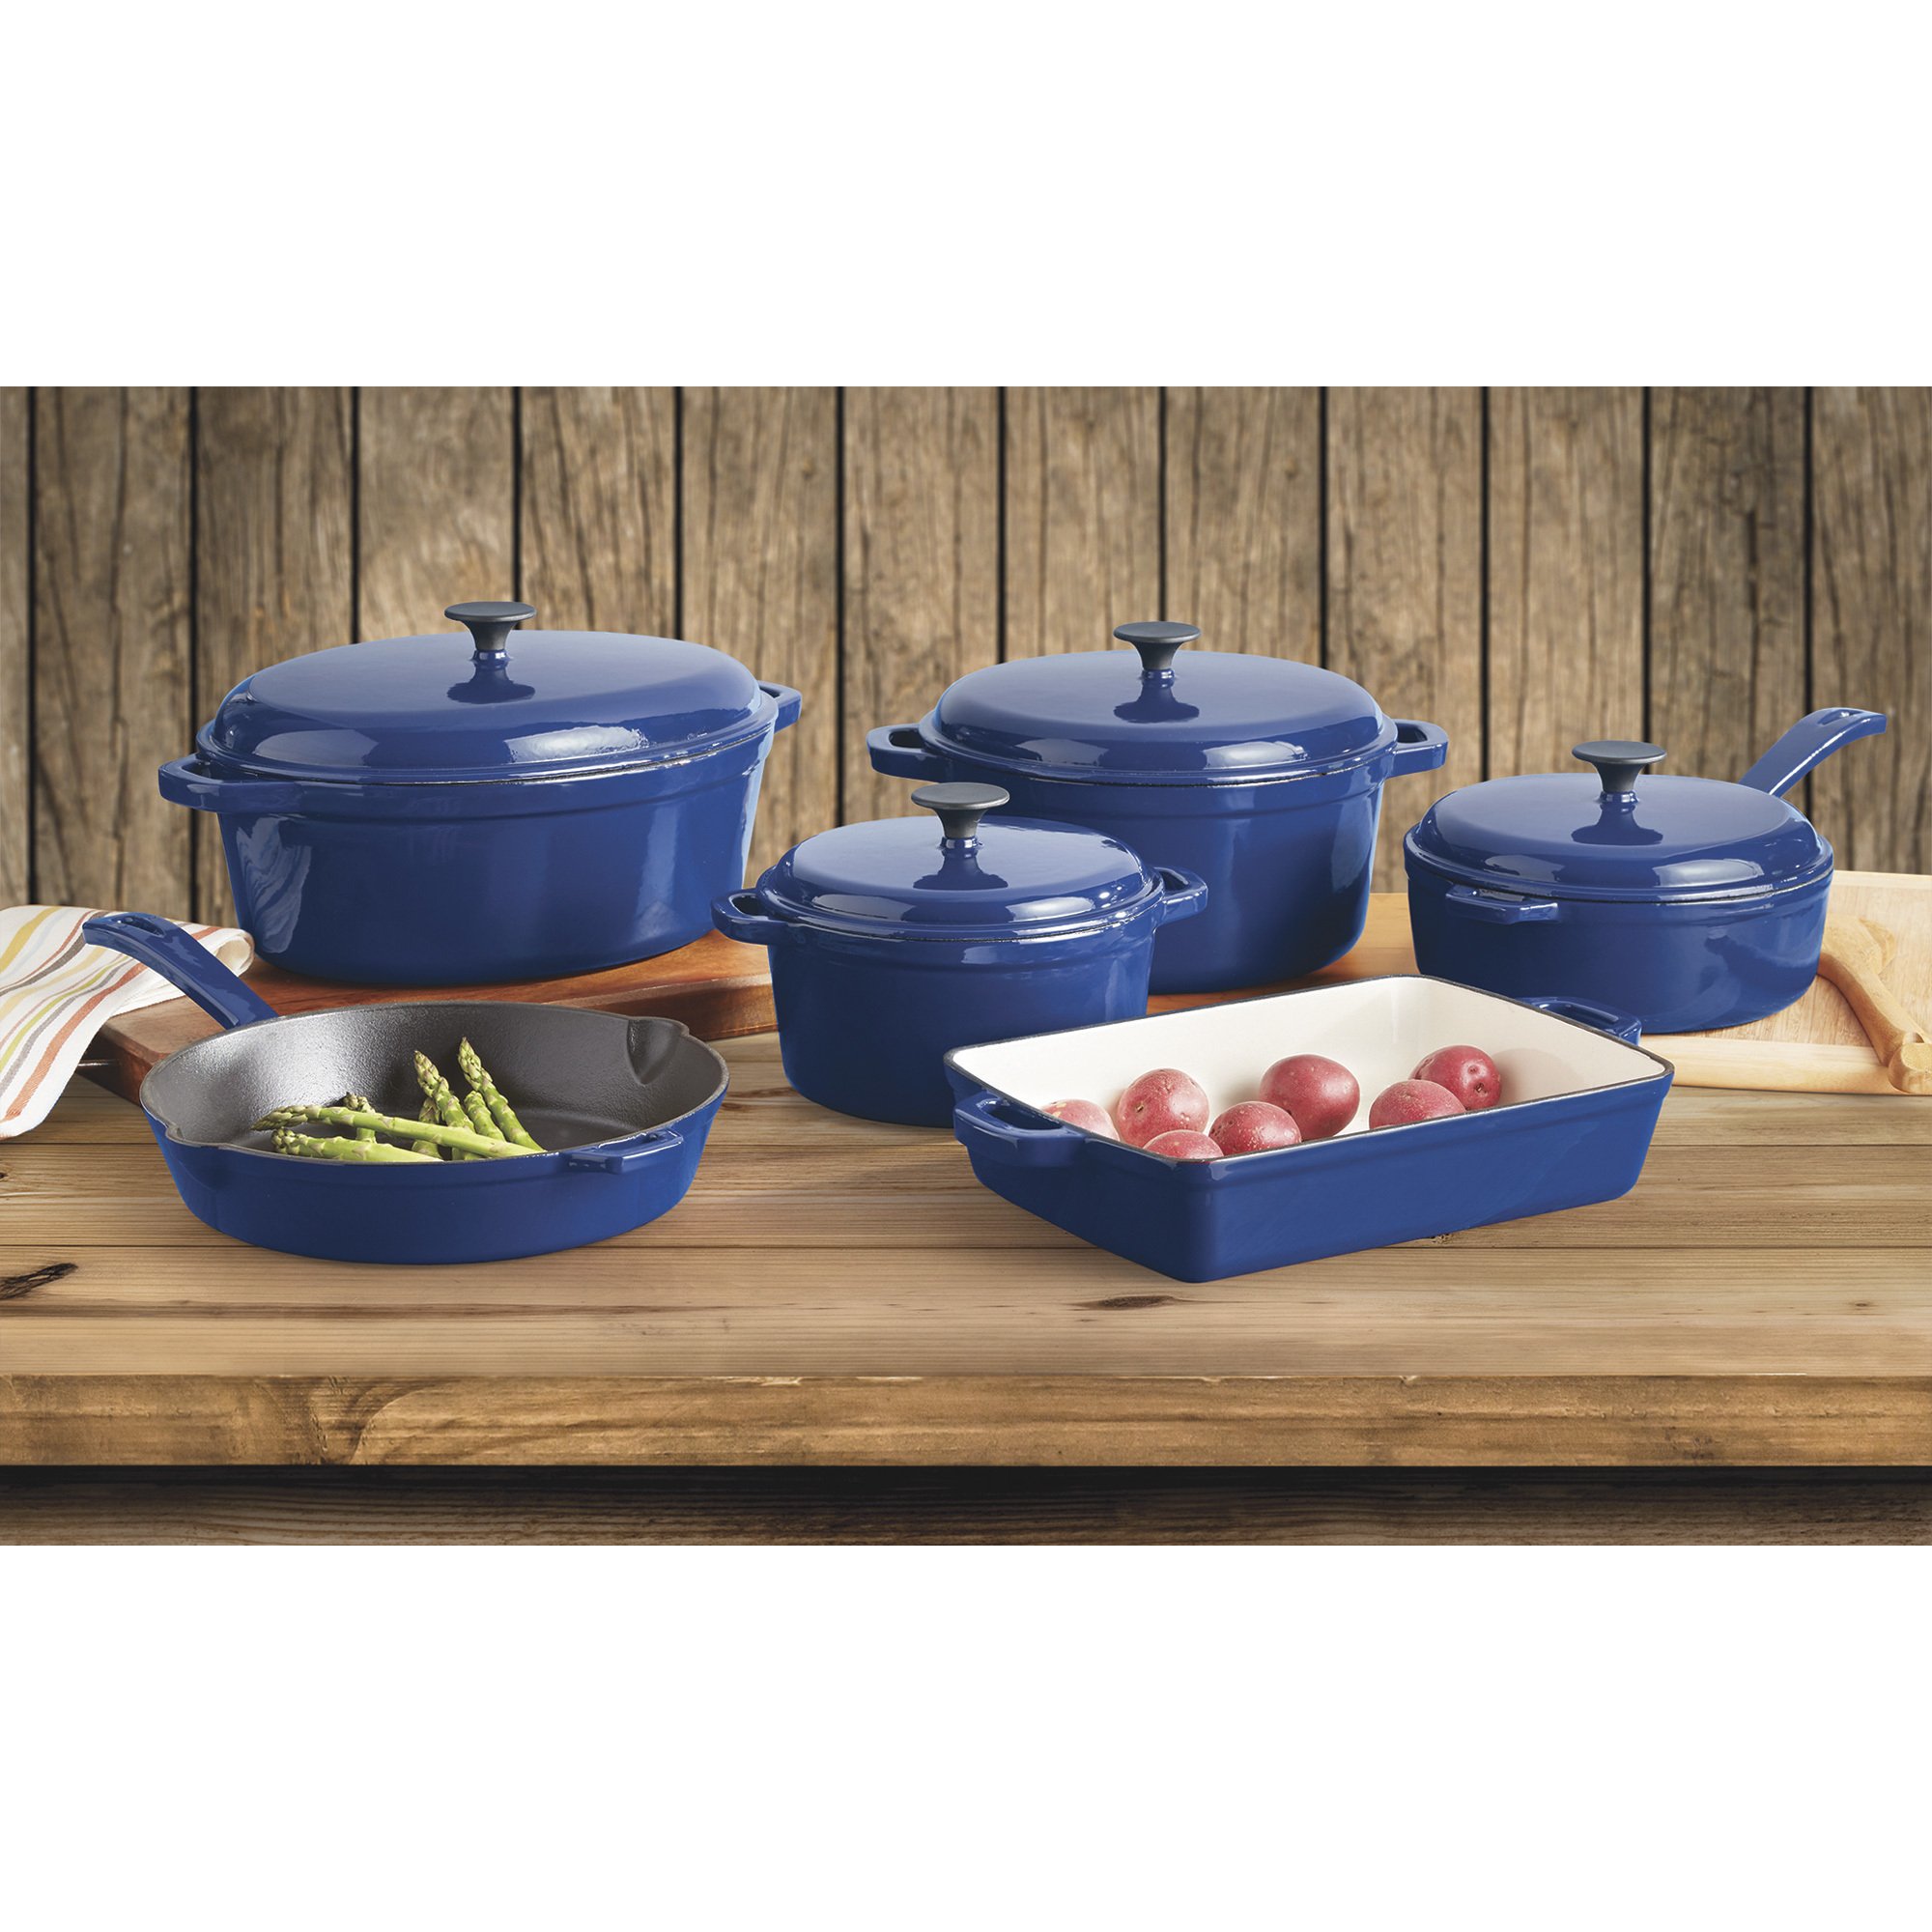 Enameled Cast Iron 5 Quart Dutch Oven with Lid - Blue – Eco + Chef Kitchen